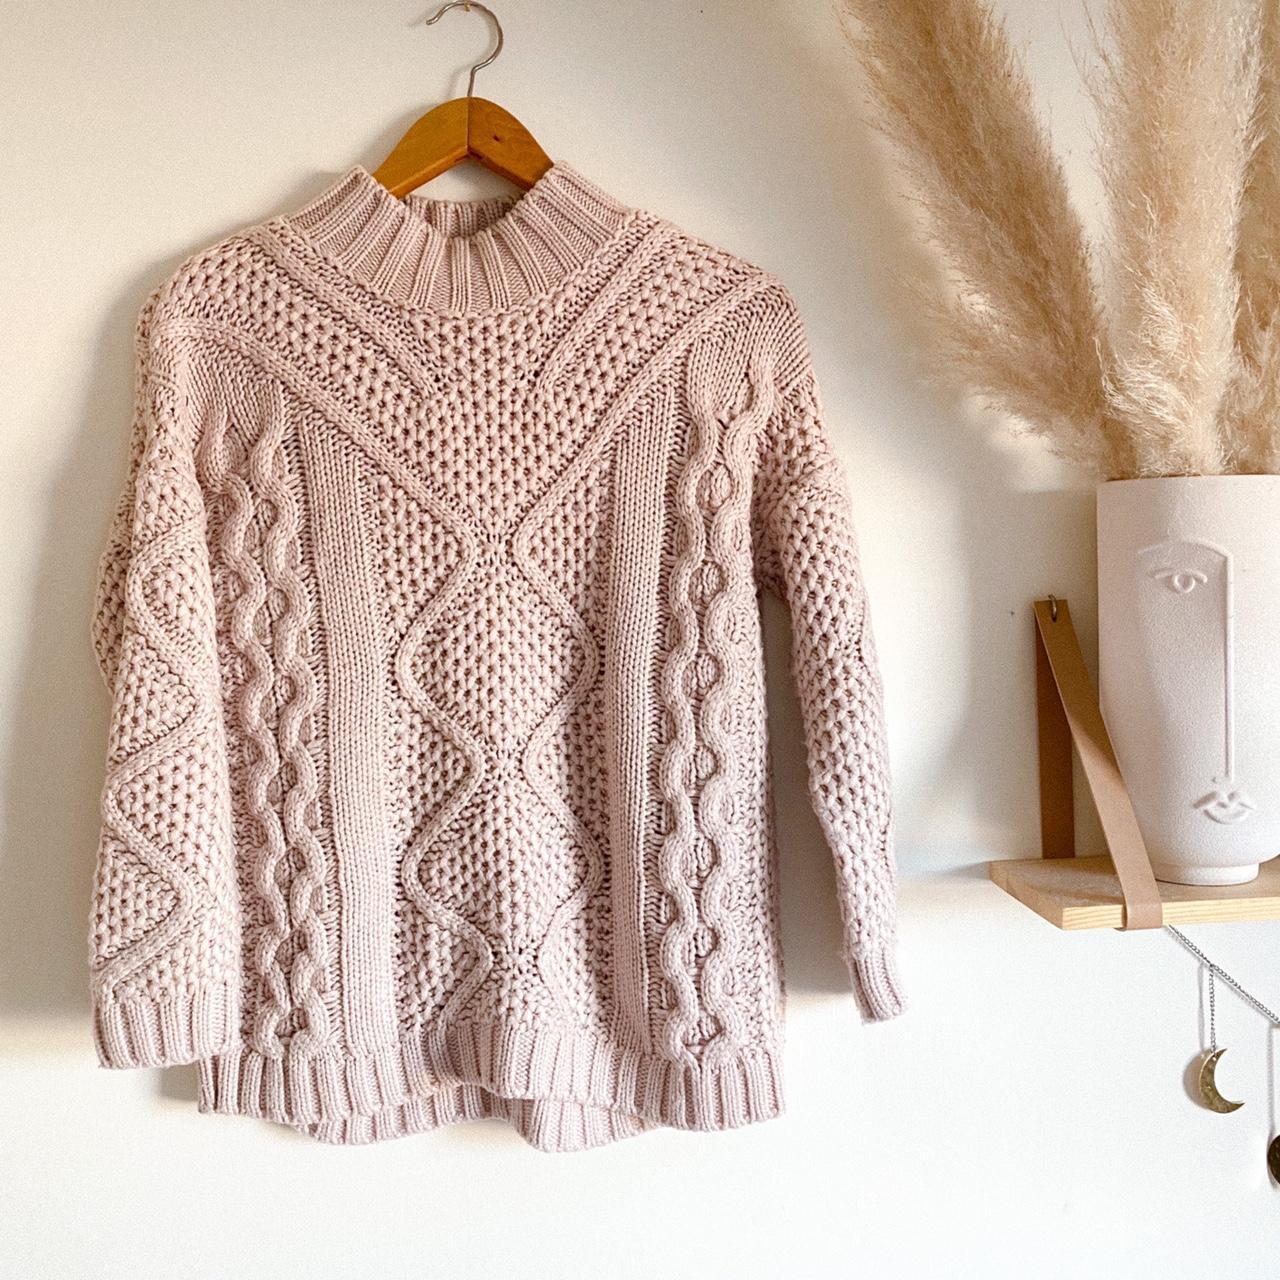 Product Image 1 - Cable knit sweater in dust